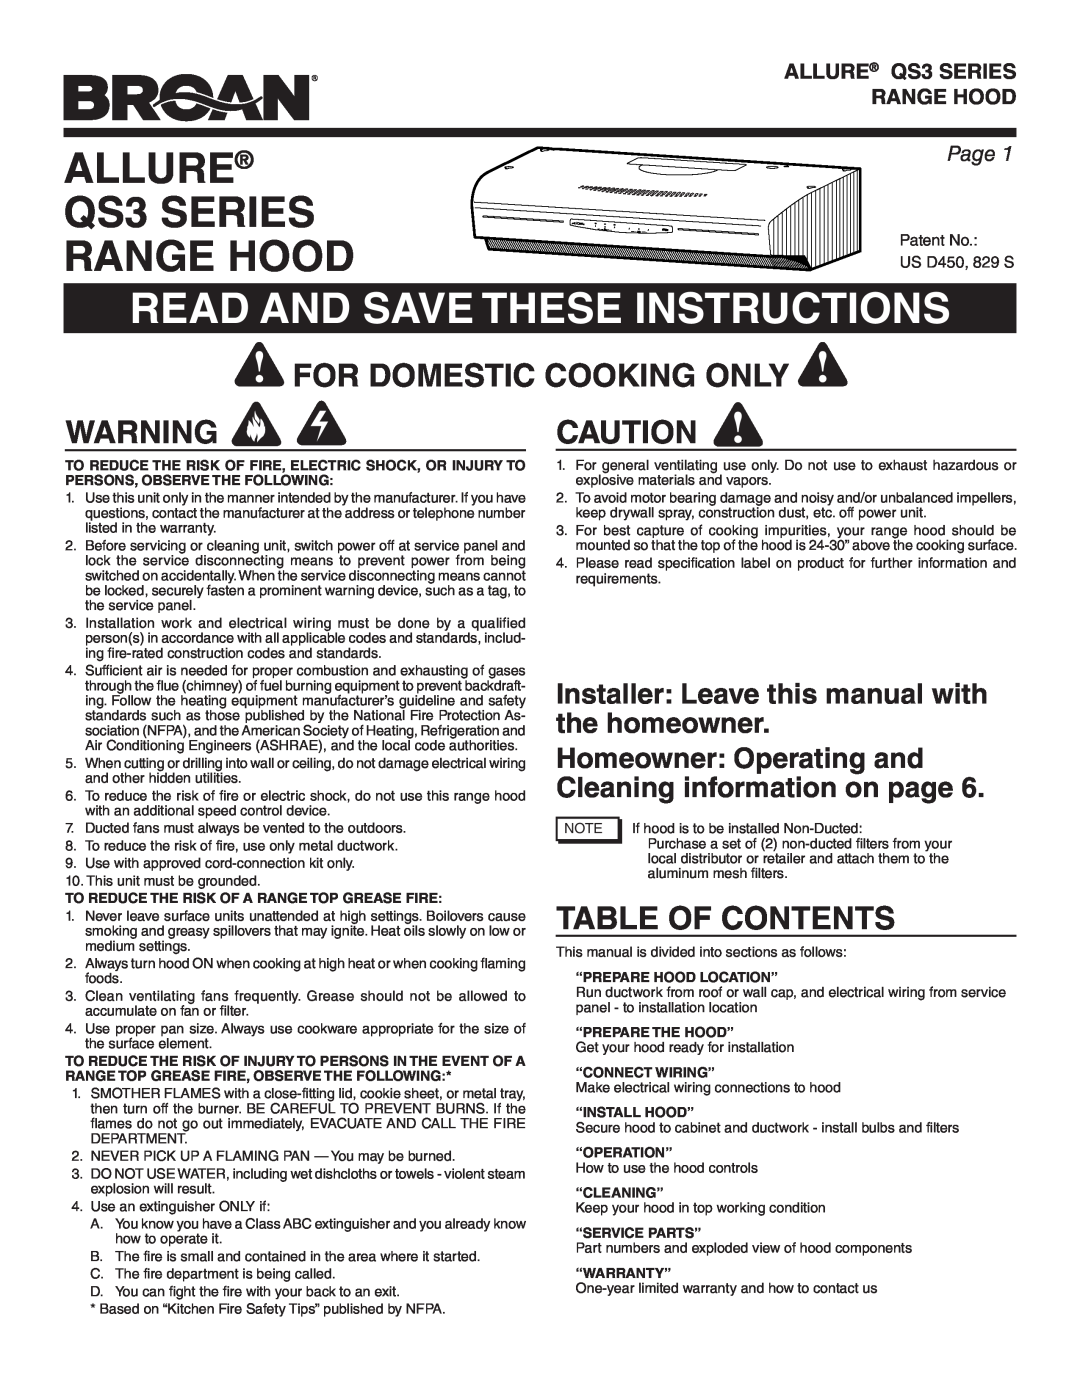 Broan QS342SS warranty ALLURE QS3 SERIES RANGE HOOD, Read And Save These Instructions, For Domestic Cooking Only, Page 